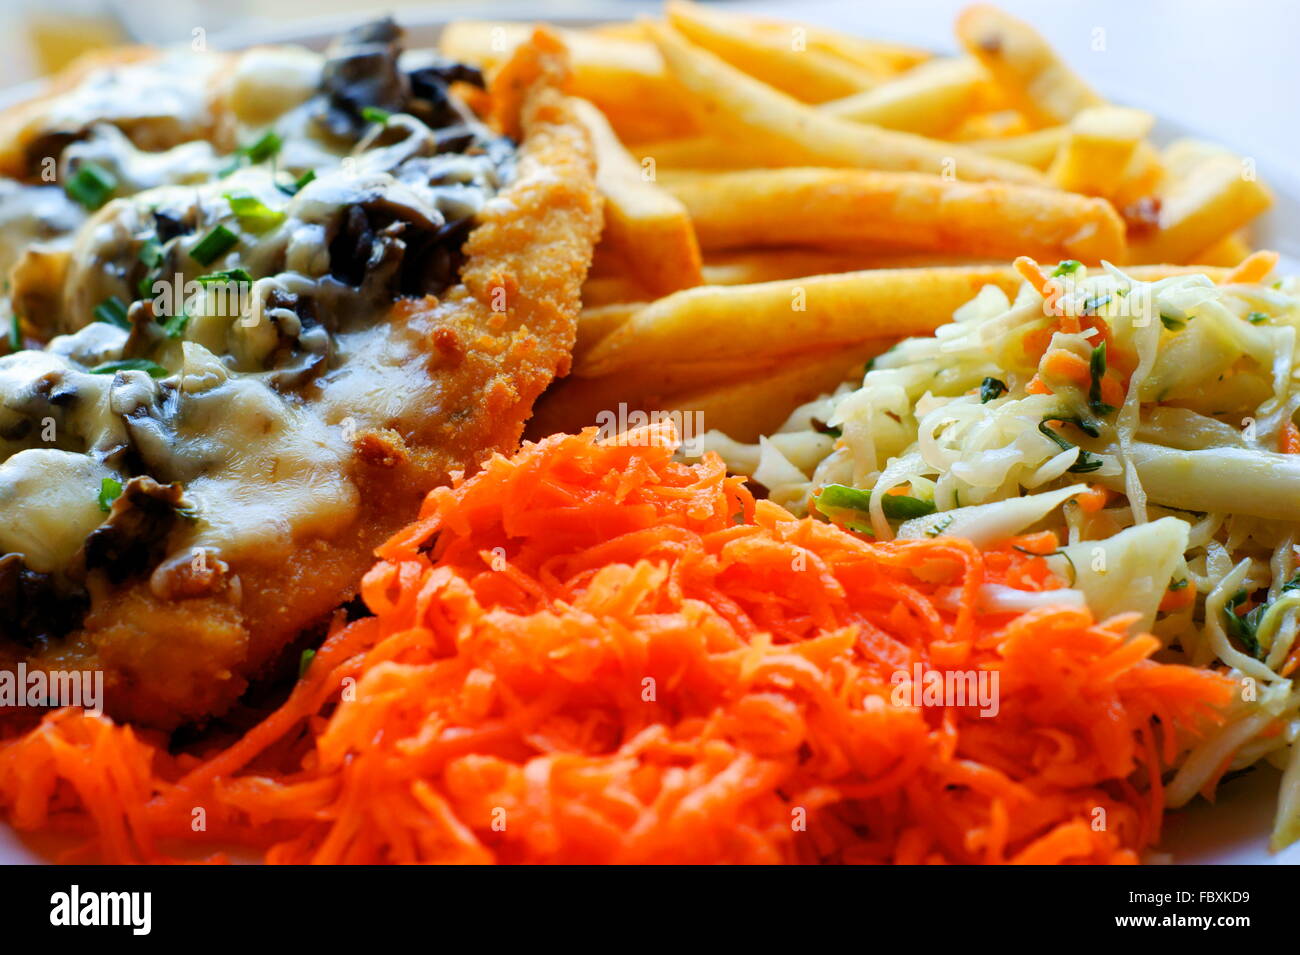 chicken steak with fries / chips and salad Stock Photo